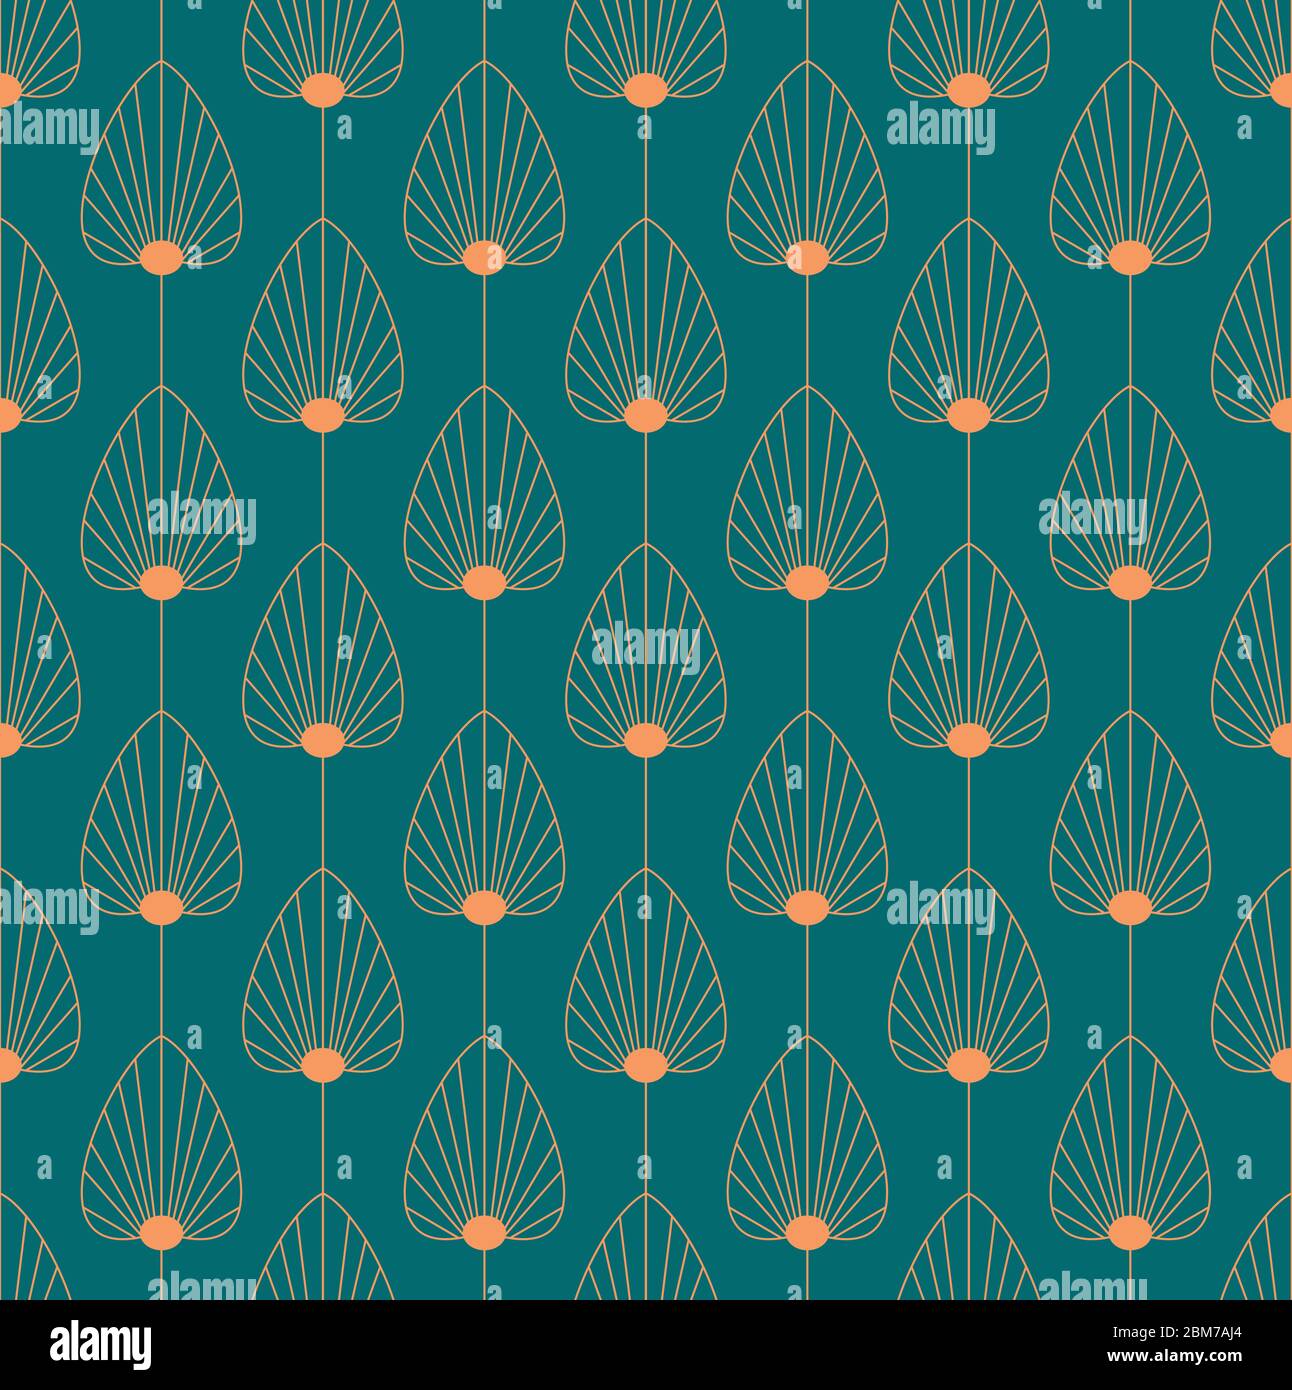 Vintage elegant Art Deco style seamless pattern with copper floral/fan shape motifs on dark green background. Orange and teal colored art deco repeat Stock Vector